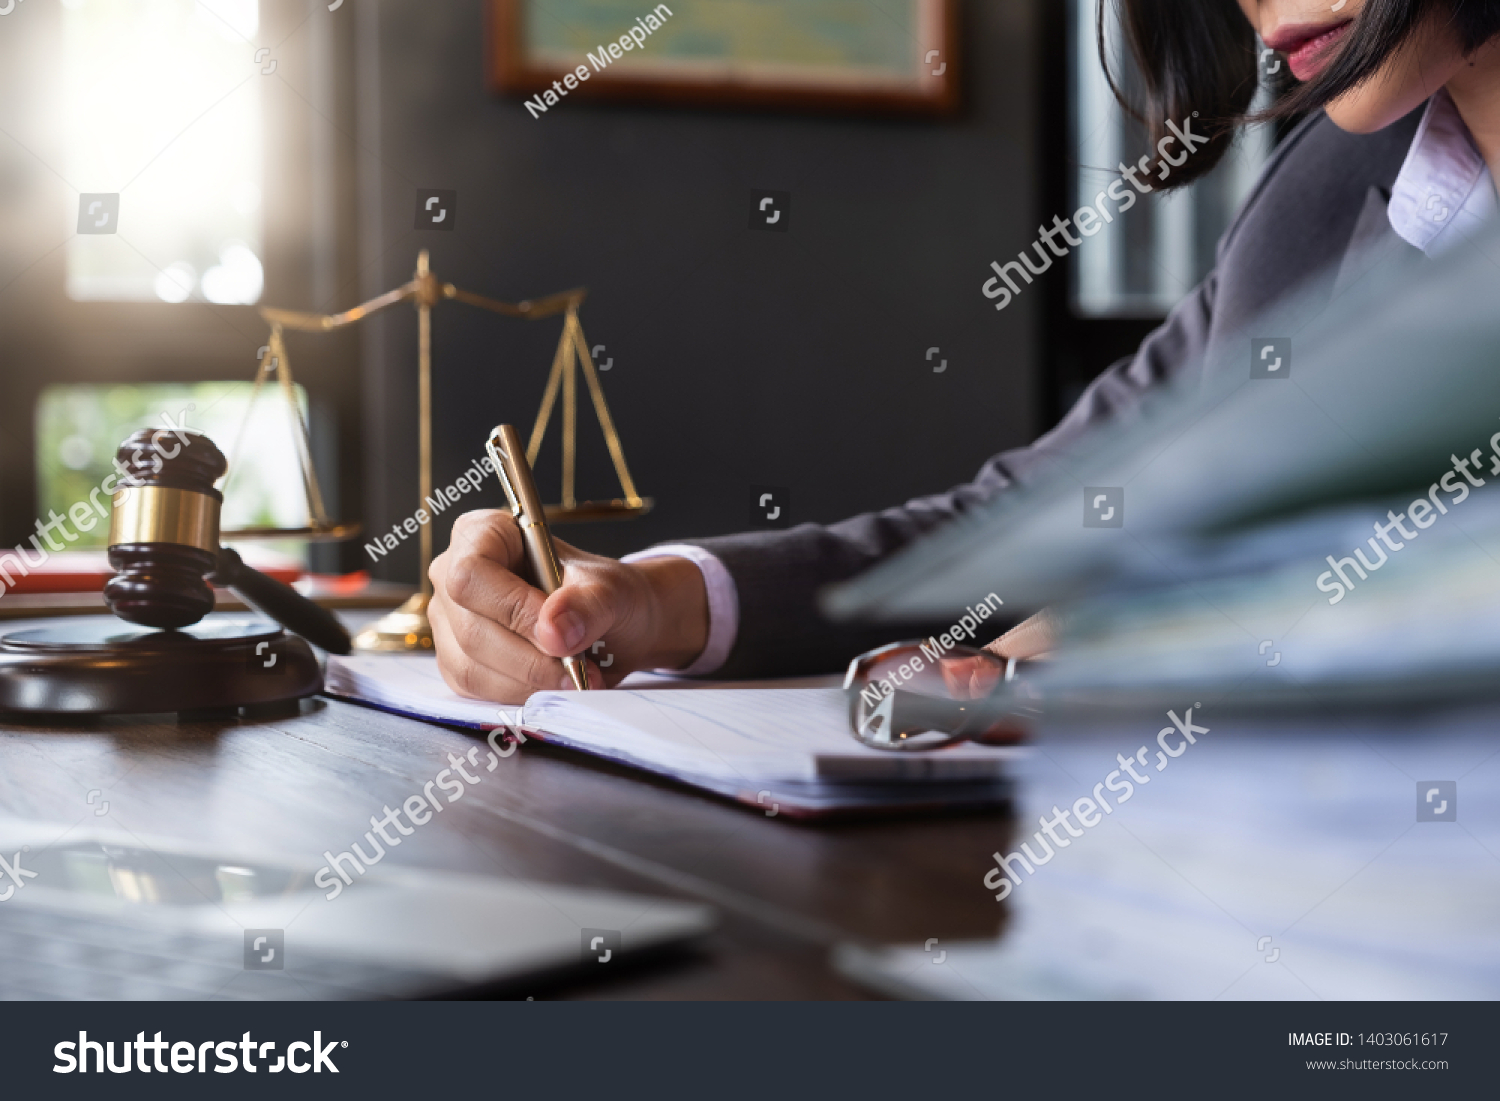 Judge gavel with Justice lawyers, Business woam in suit or lawyer working on a documents. Legal law, advice and justice concept. #1403061617